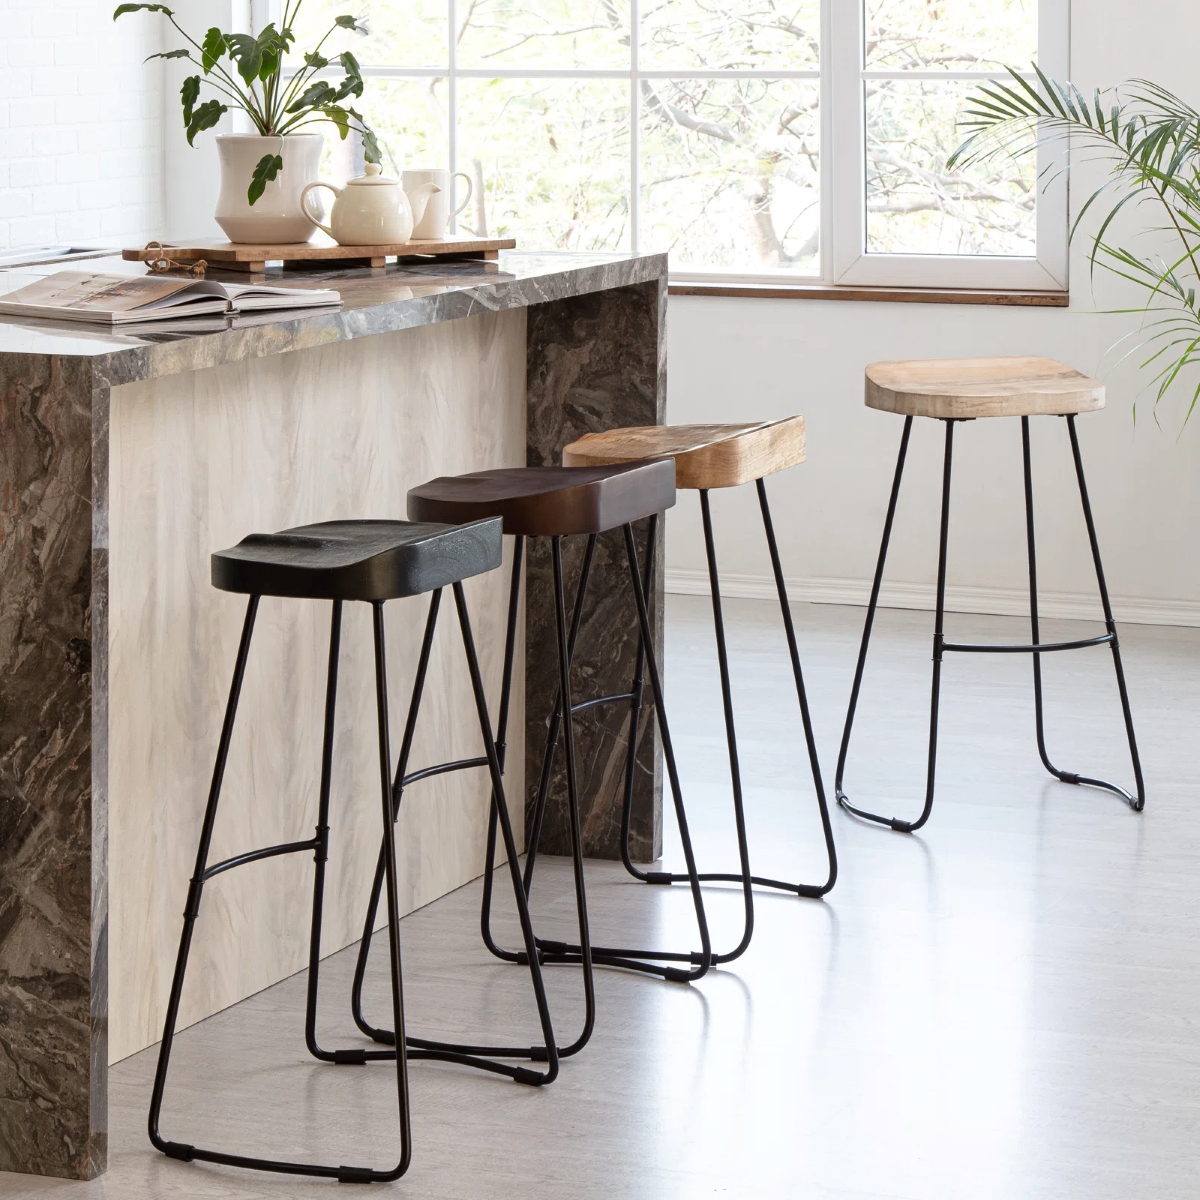 Modern wooden kitchen island seats with thin metal frames.